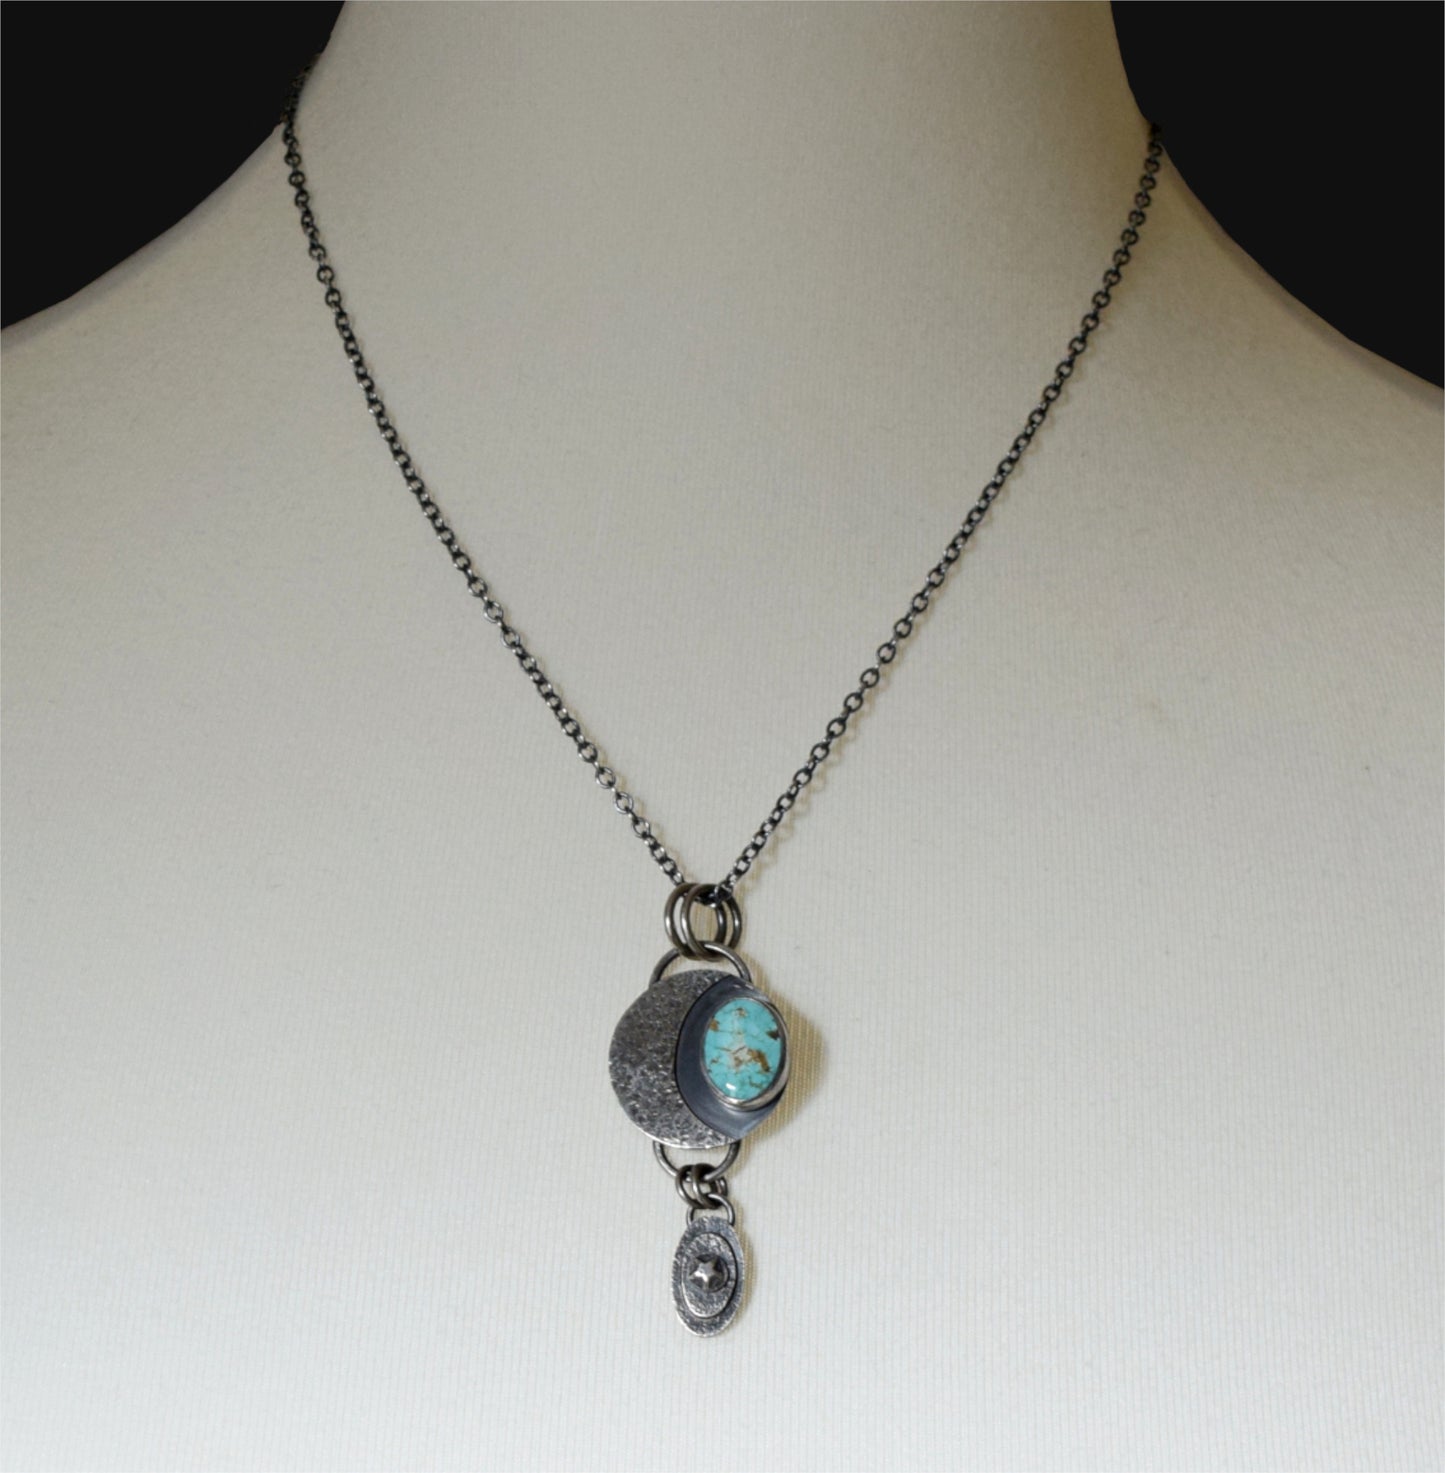 Mystical Crescent Moon & Star Necklace with Carico Lake Turquoise in Rustic Sterling Silver